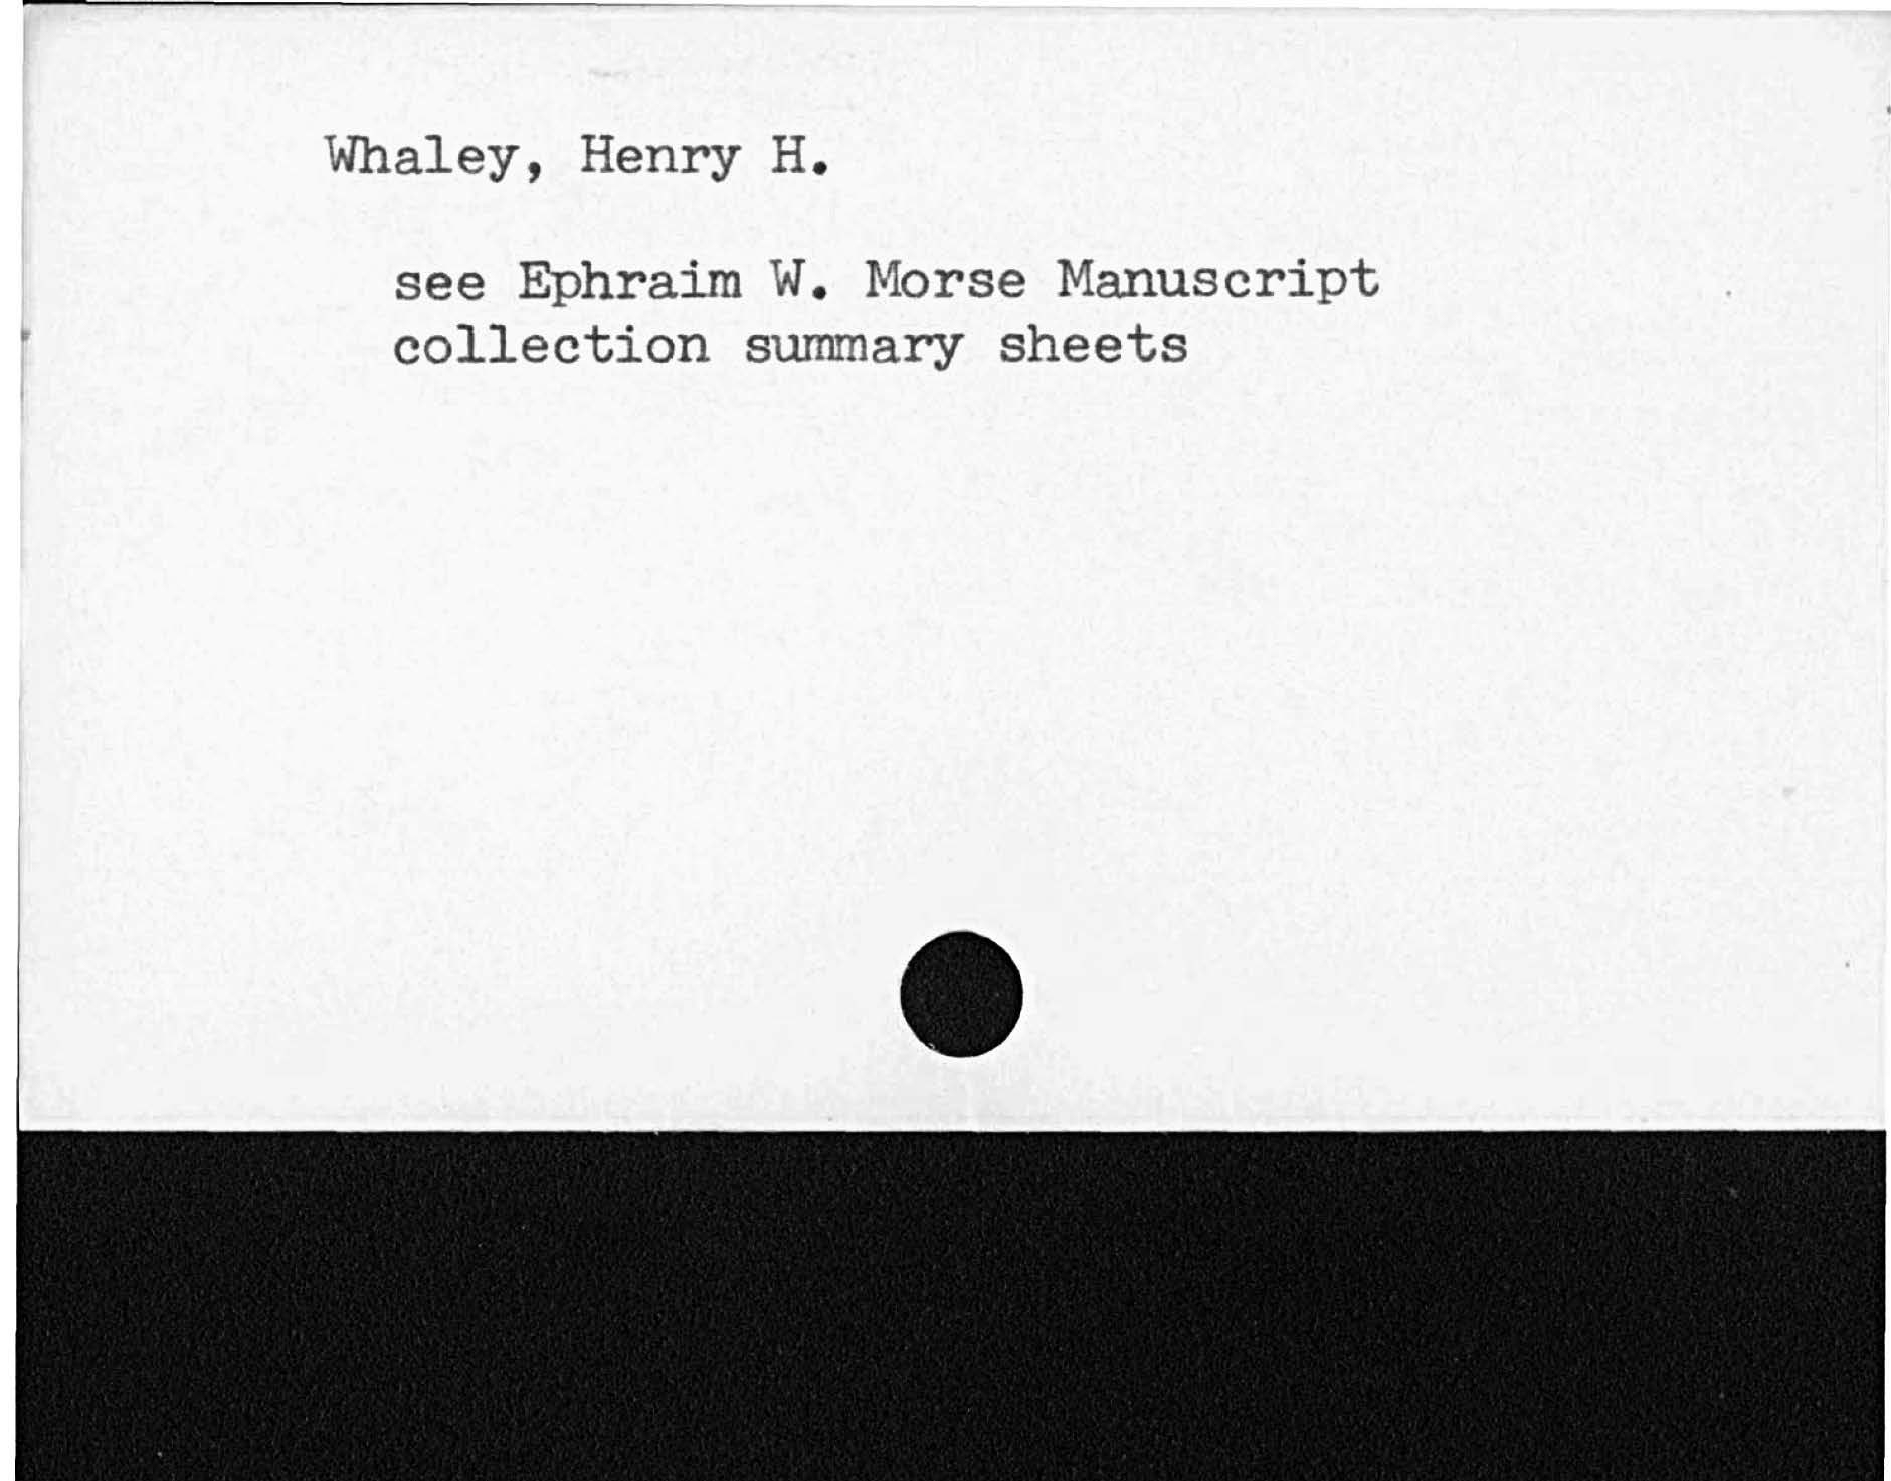 Whaley, Henry H.see Ephraim W. Morse Manuscriptcollection summary sheets